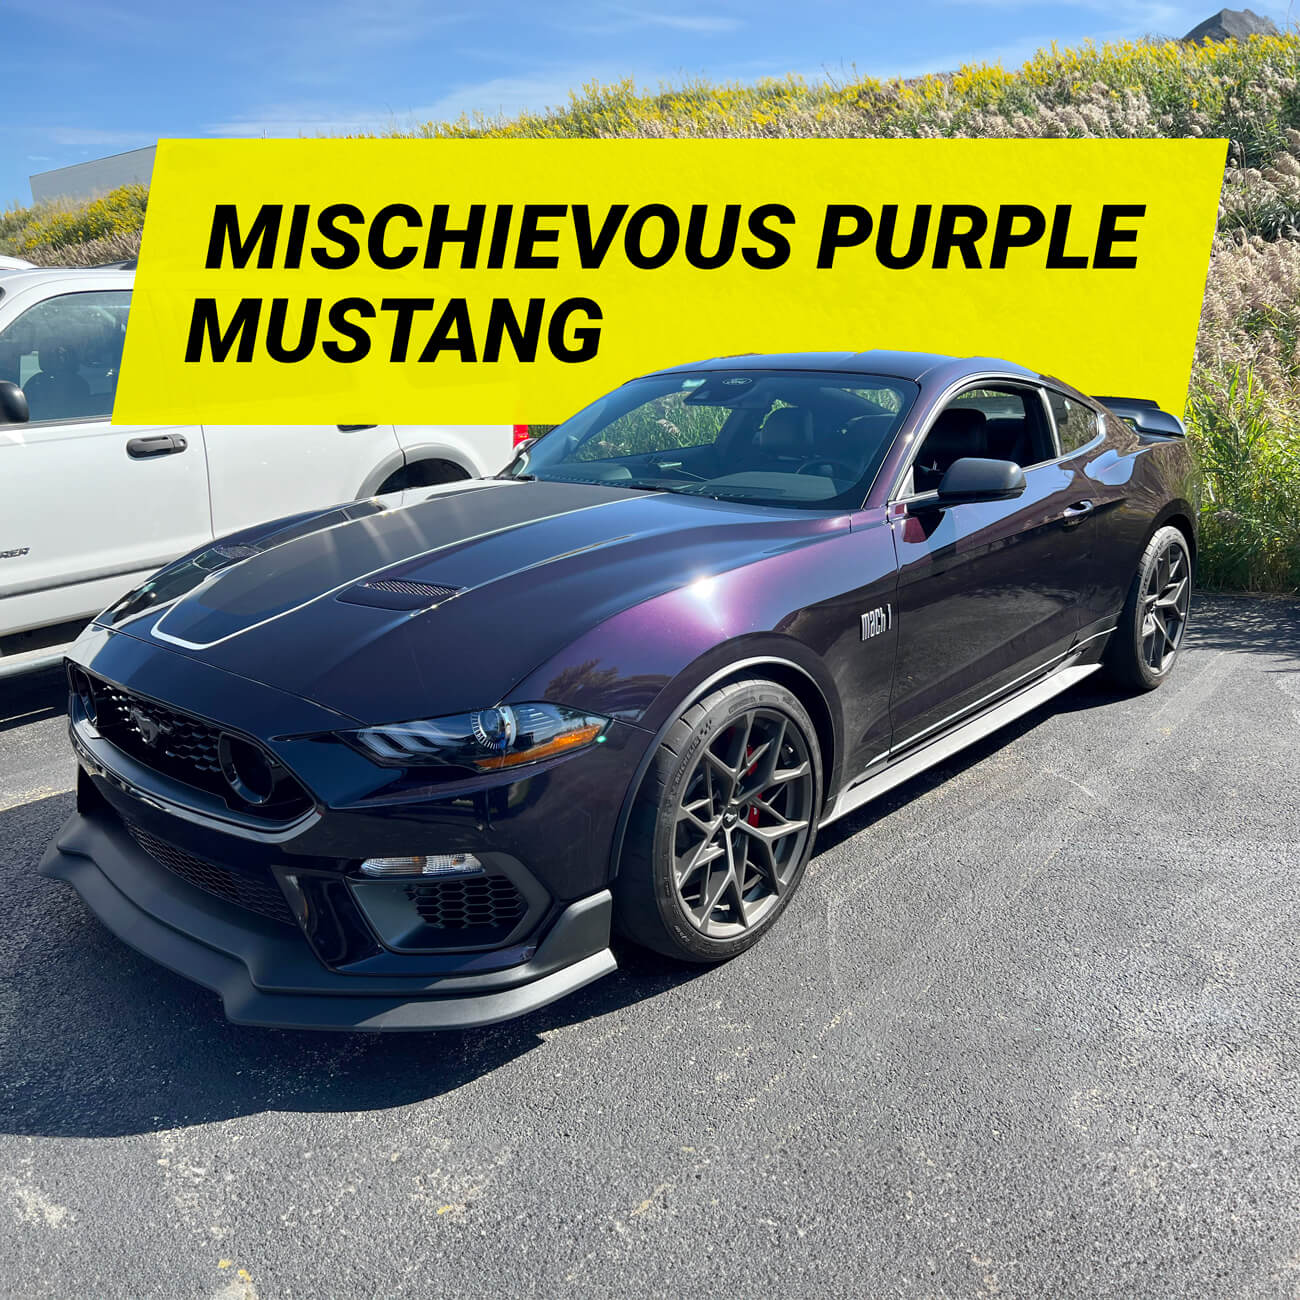 The Mischievous Purple 2022 Ford Mustang //